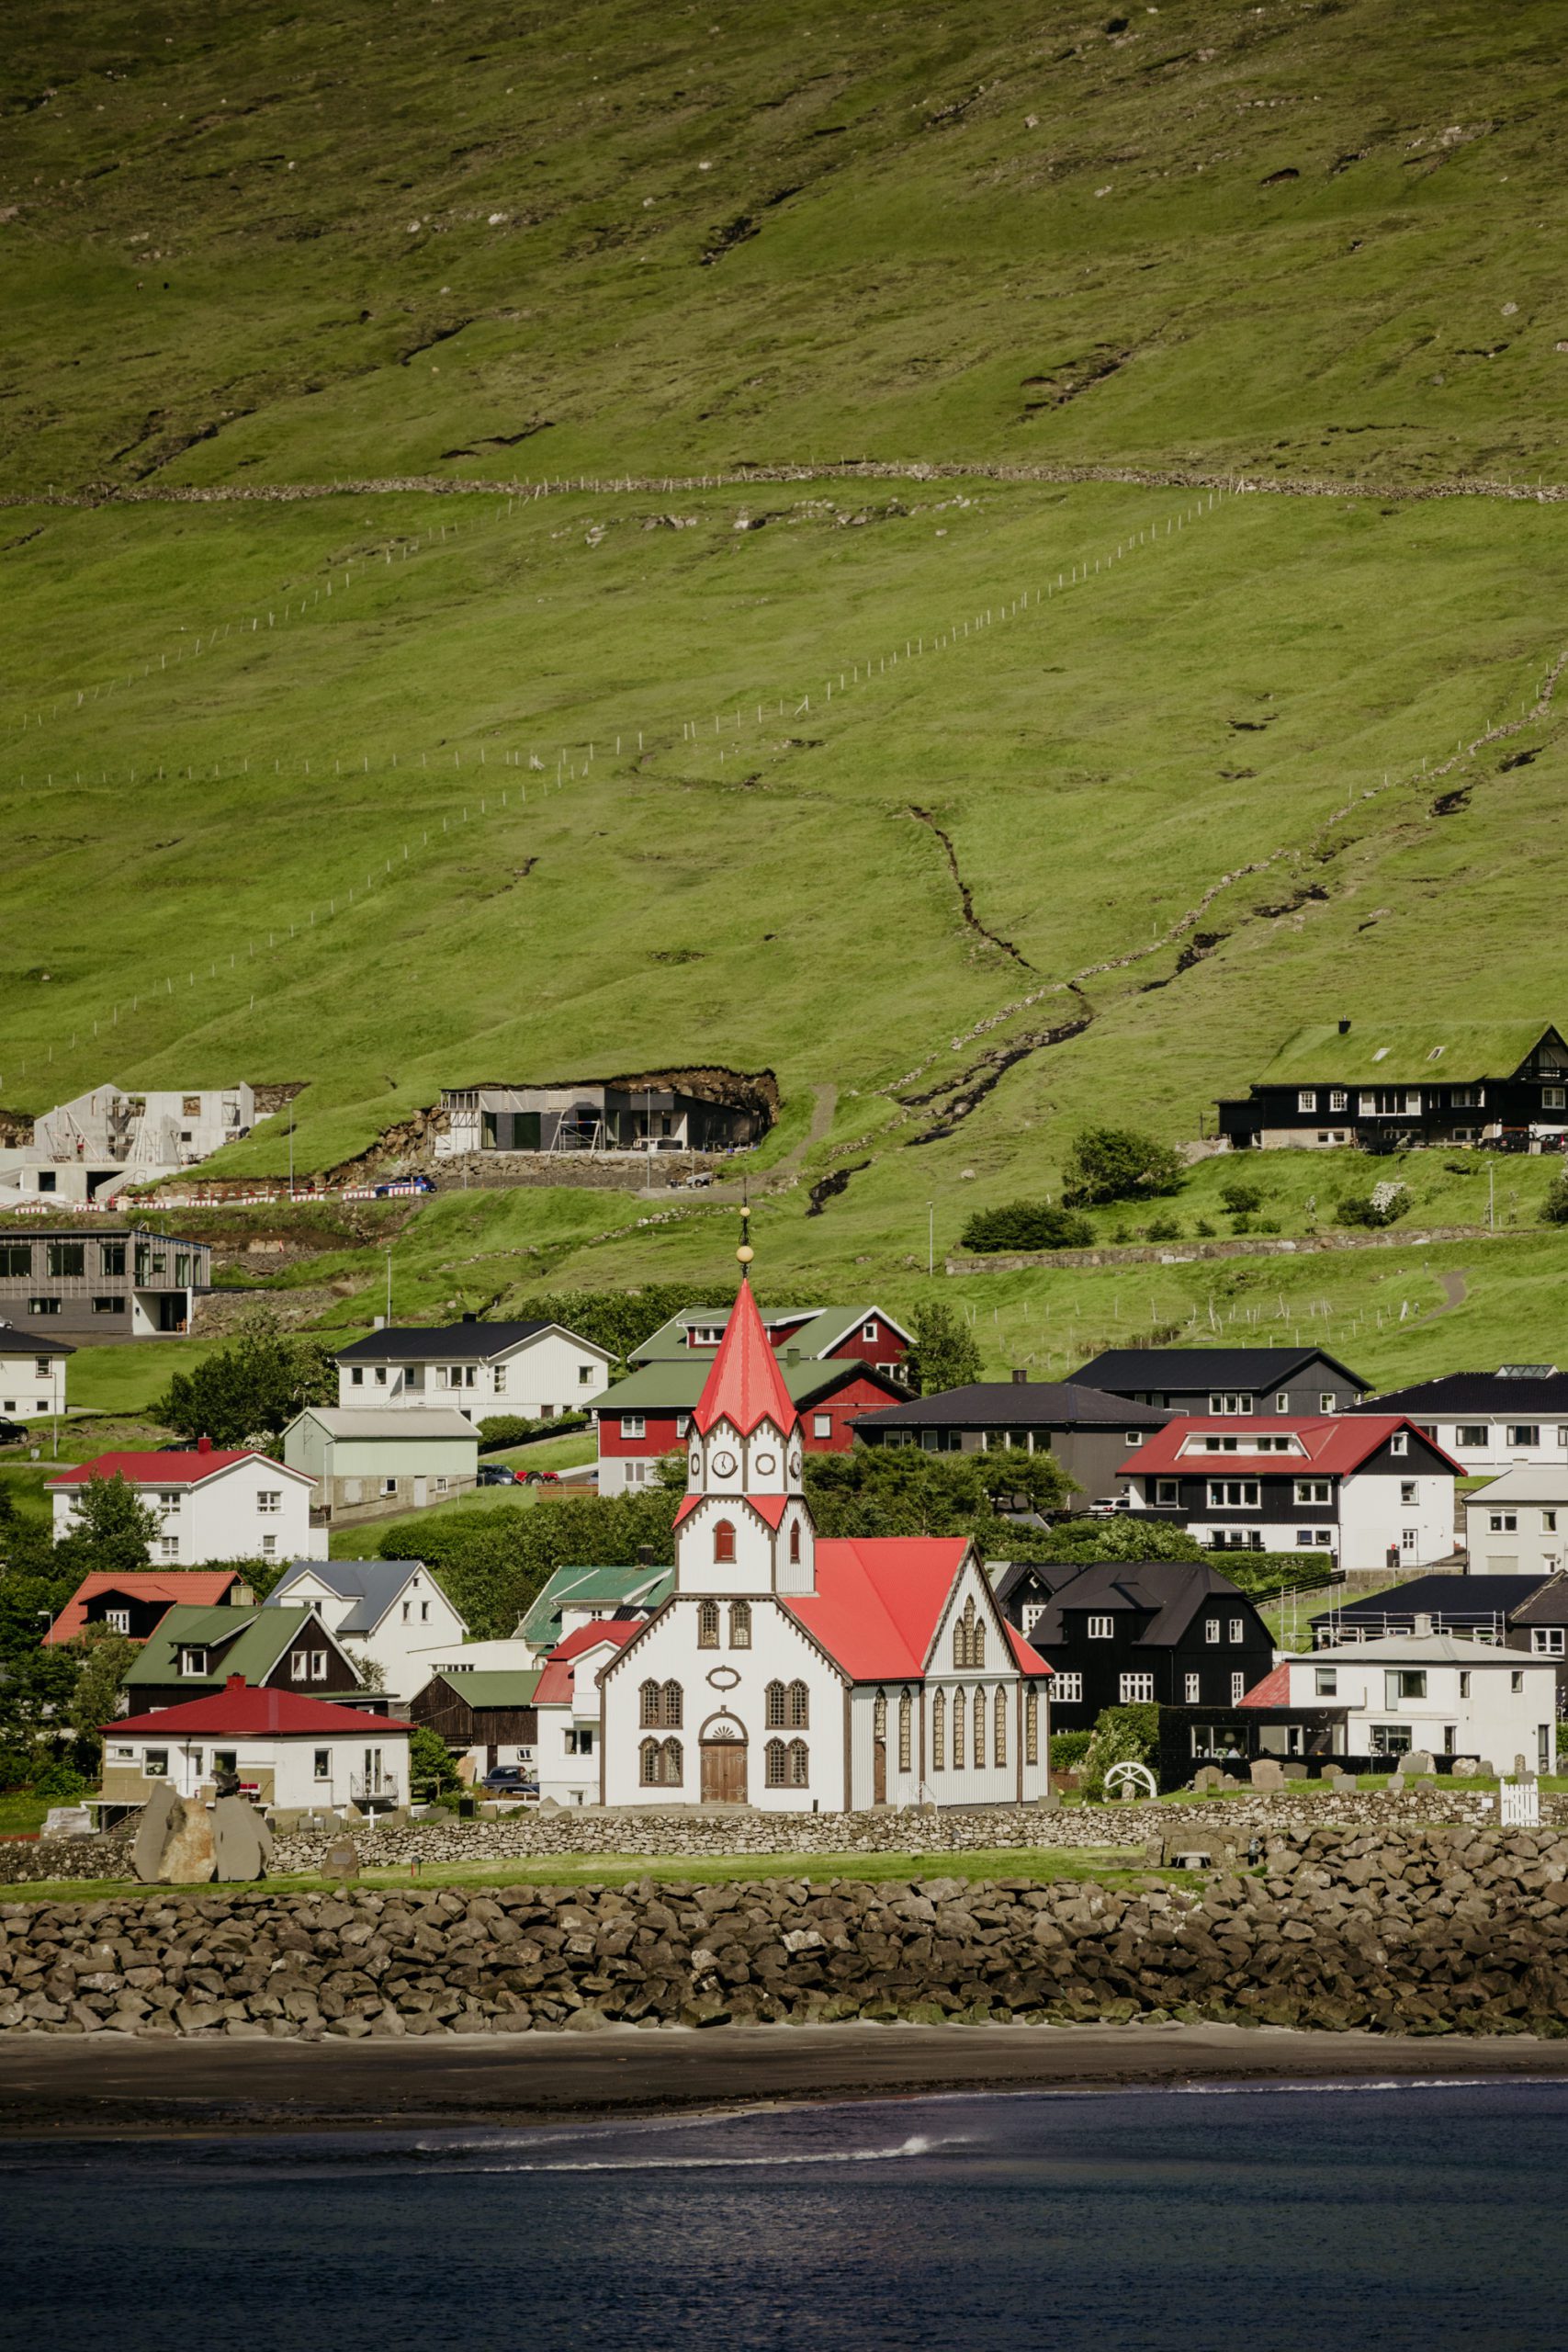 How to elope in Faroe Islands. The village Sandavágur is situated on Vágar island. red roof church in Sandavagur. 